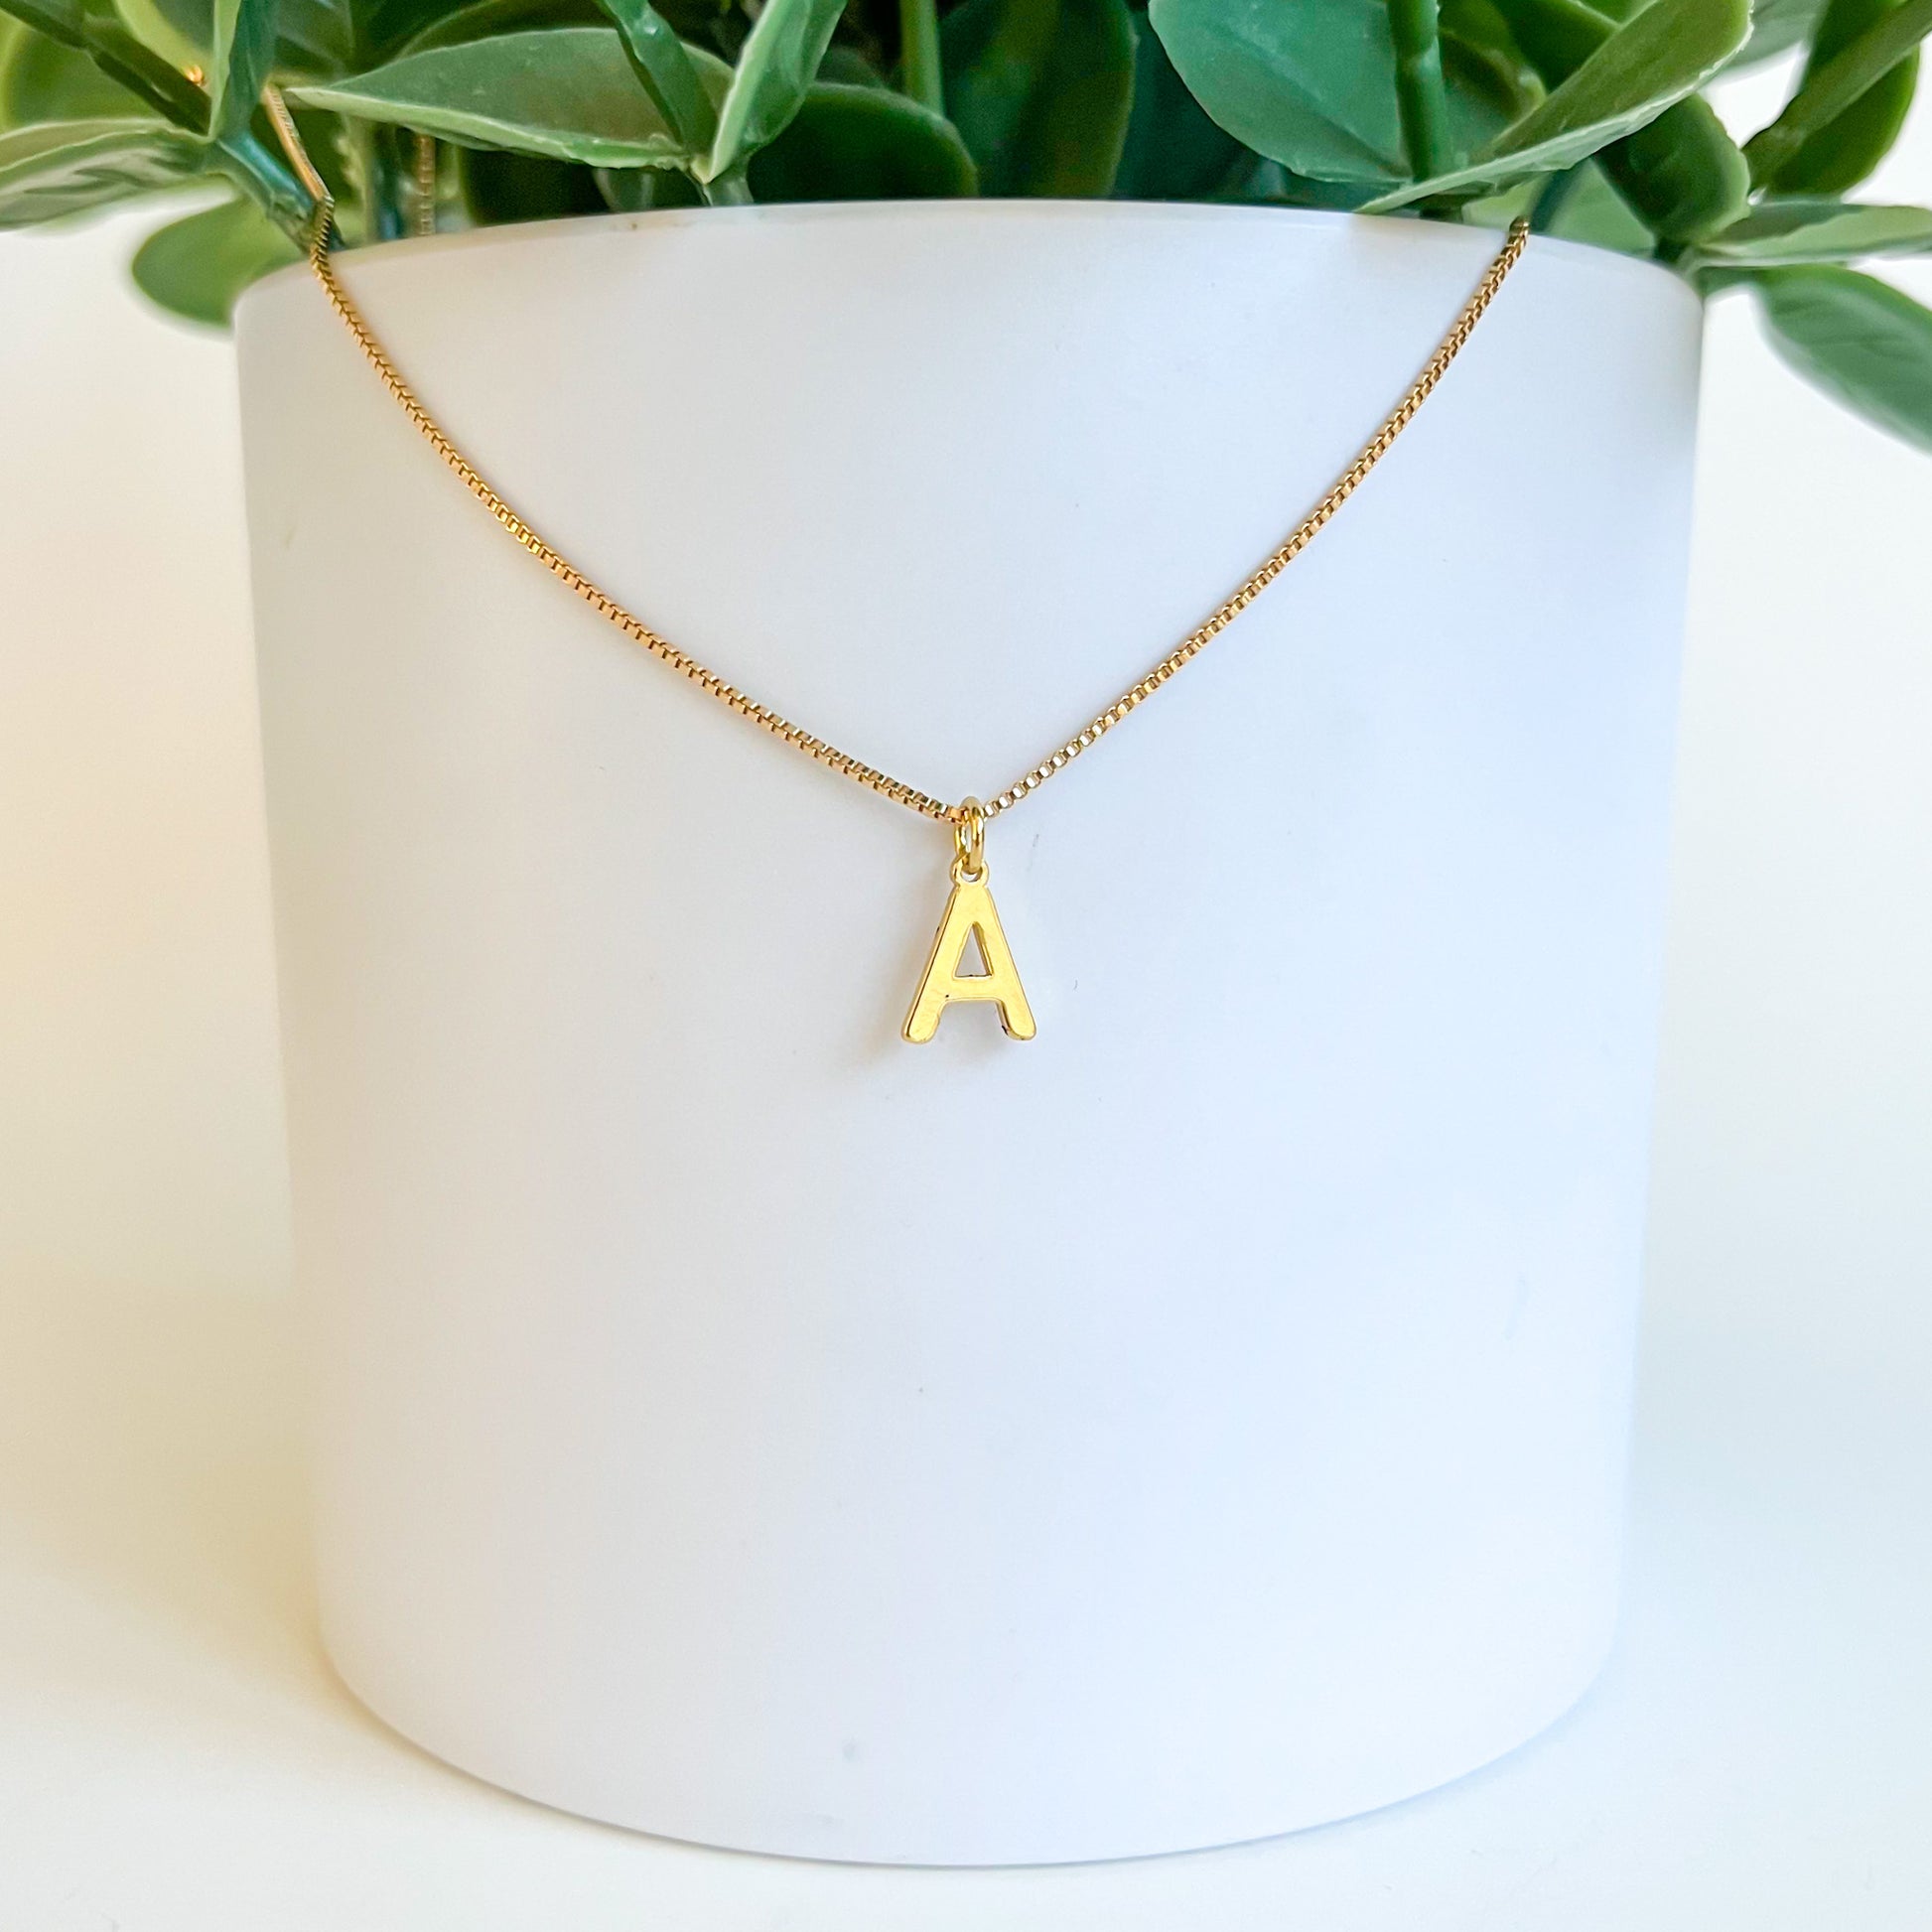 Buy Gold Filled Initial Necklace Letter Necklace Gold Filled